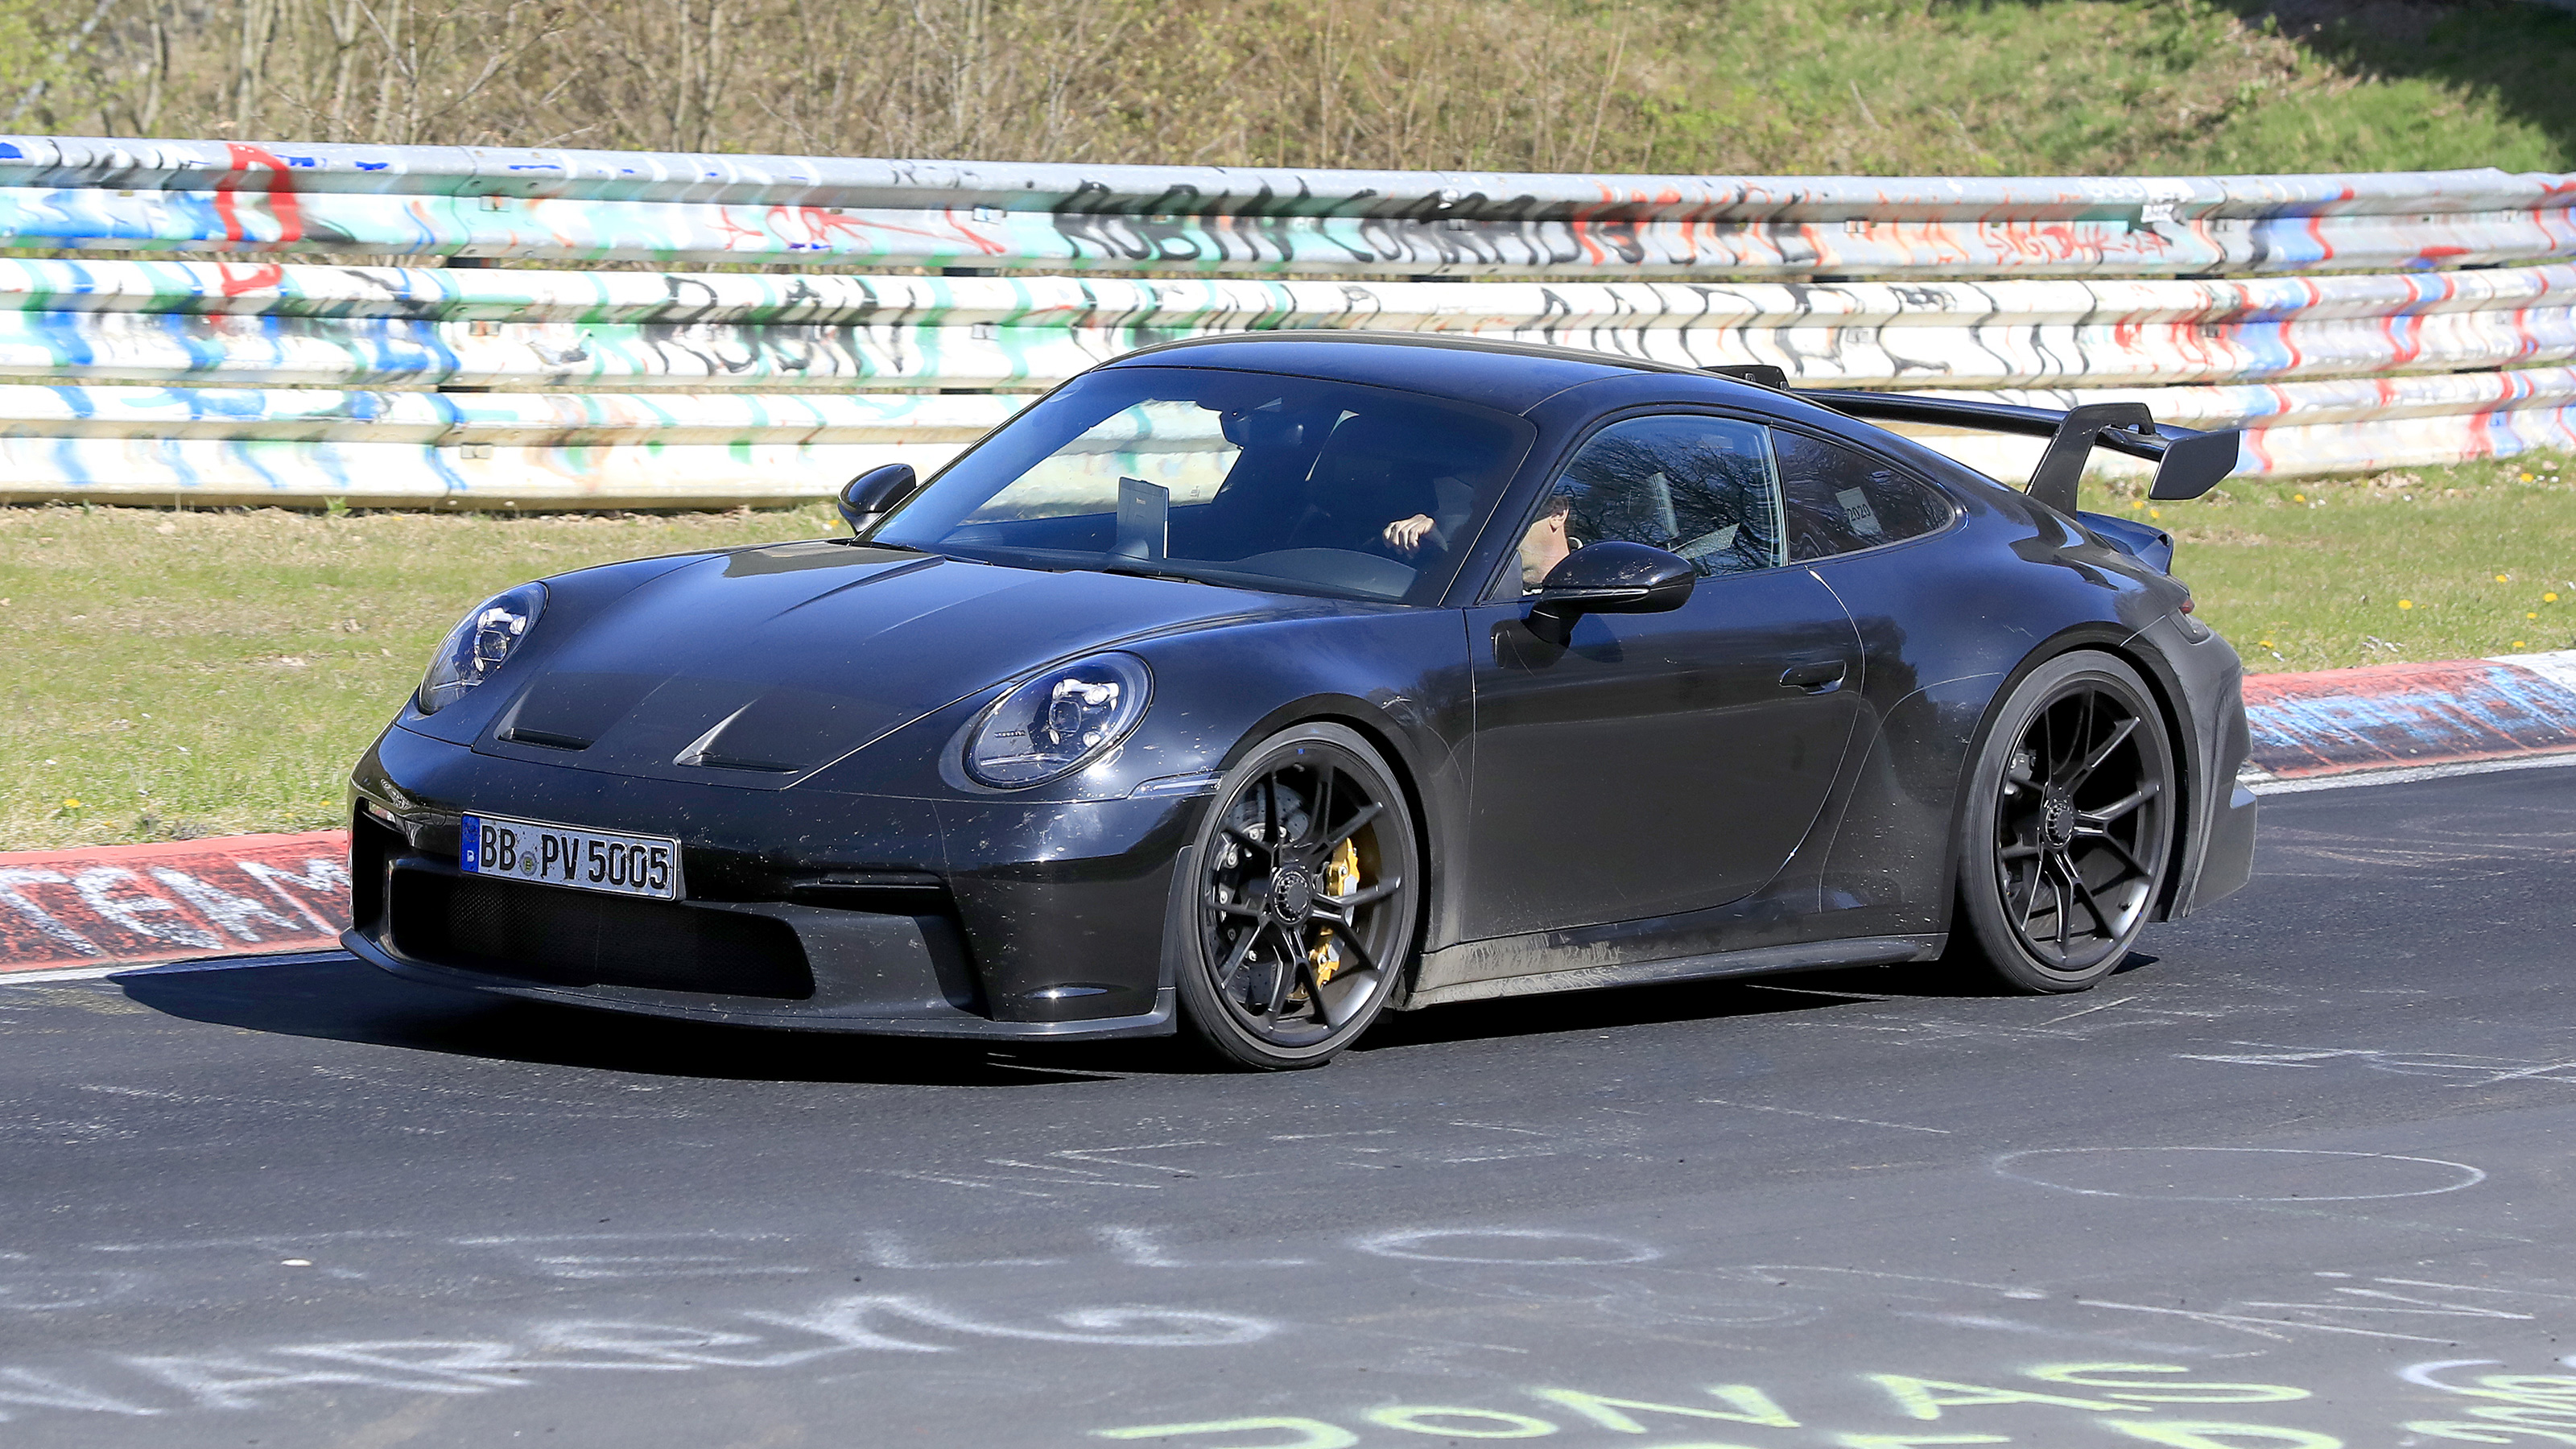 New 2020 Porsche 911 GT3 spied testing at the Nurburgring ...